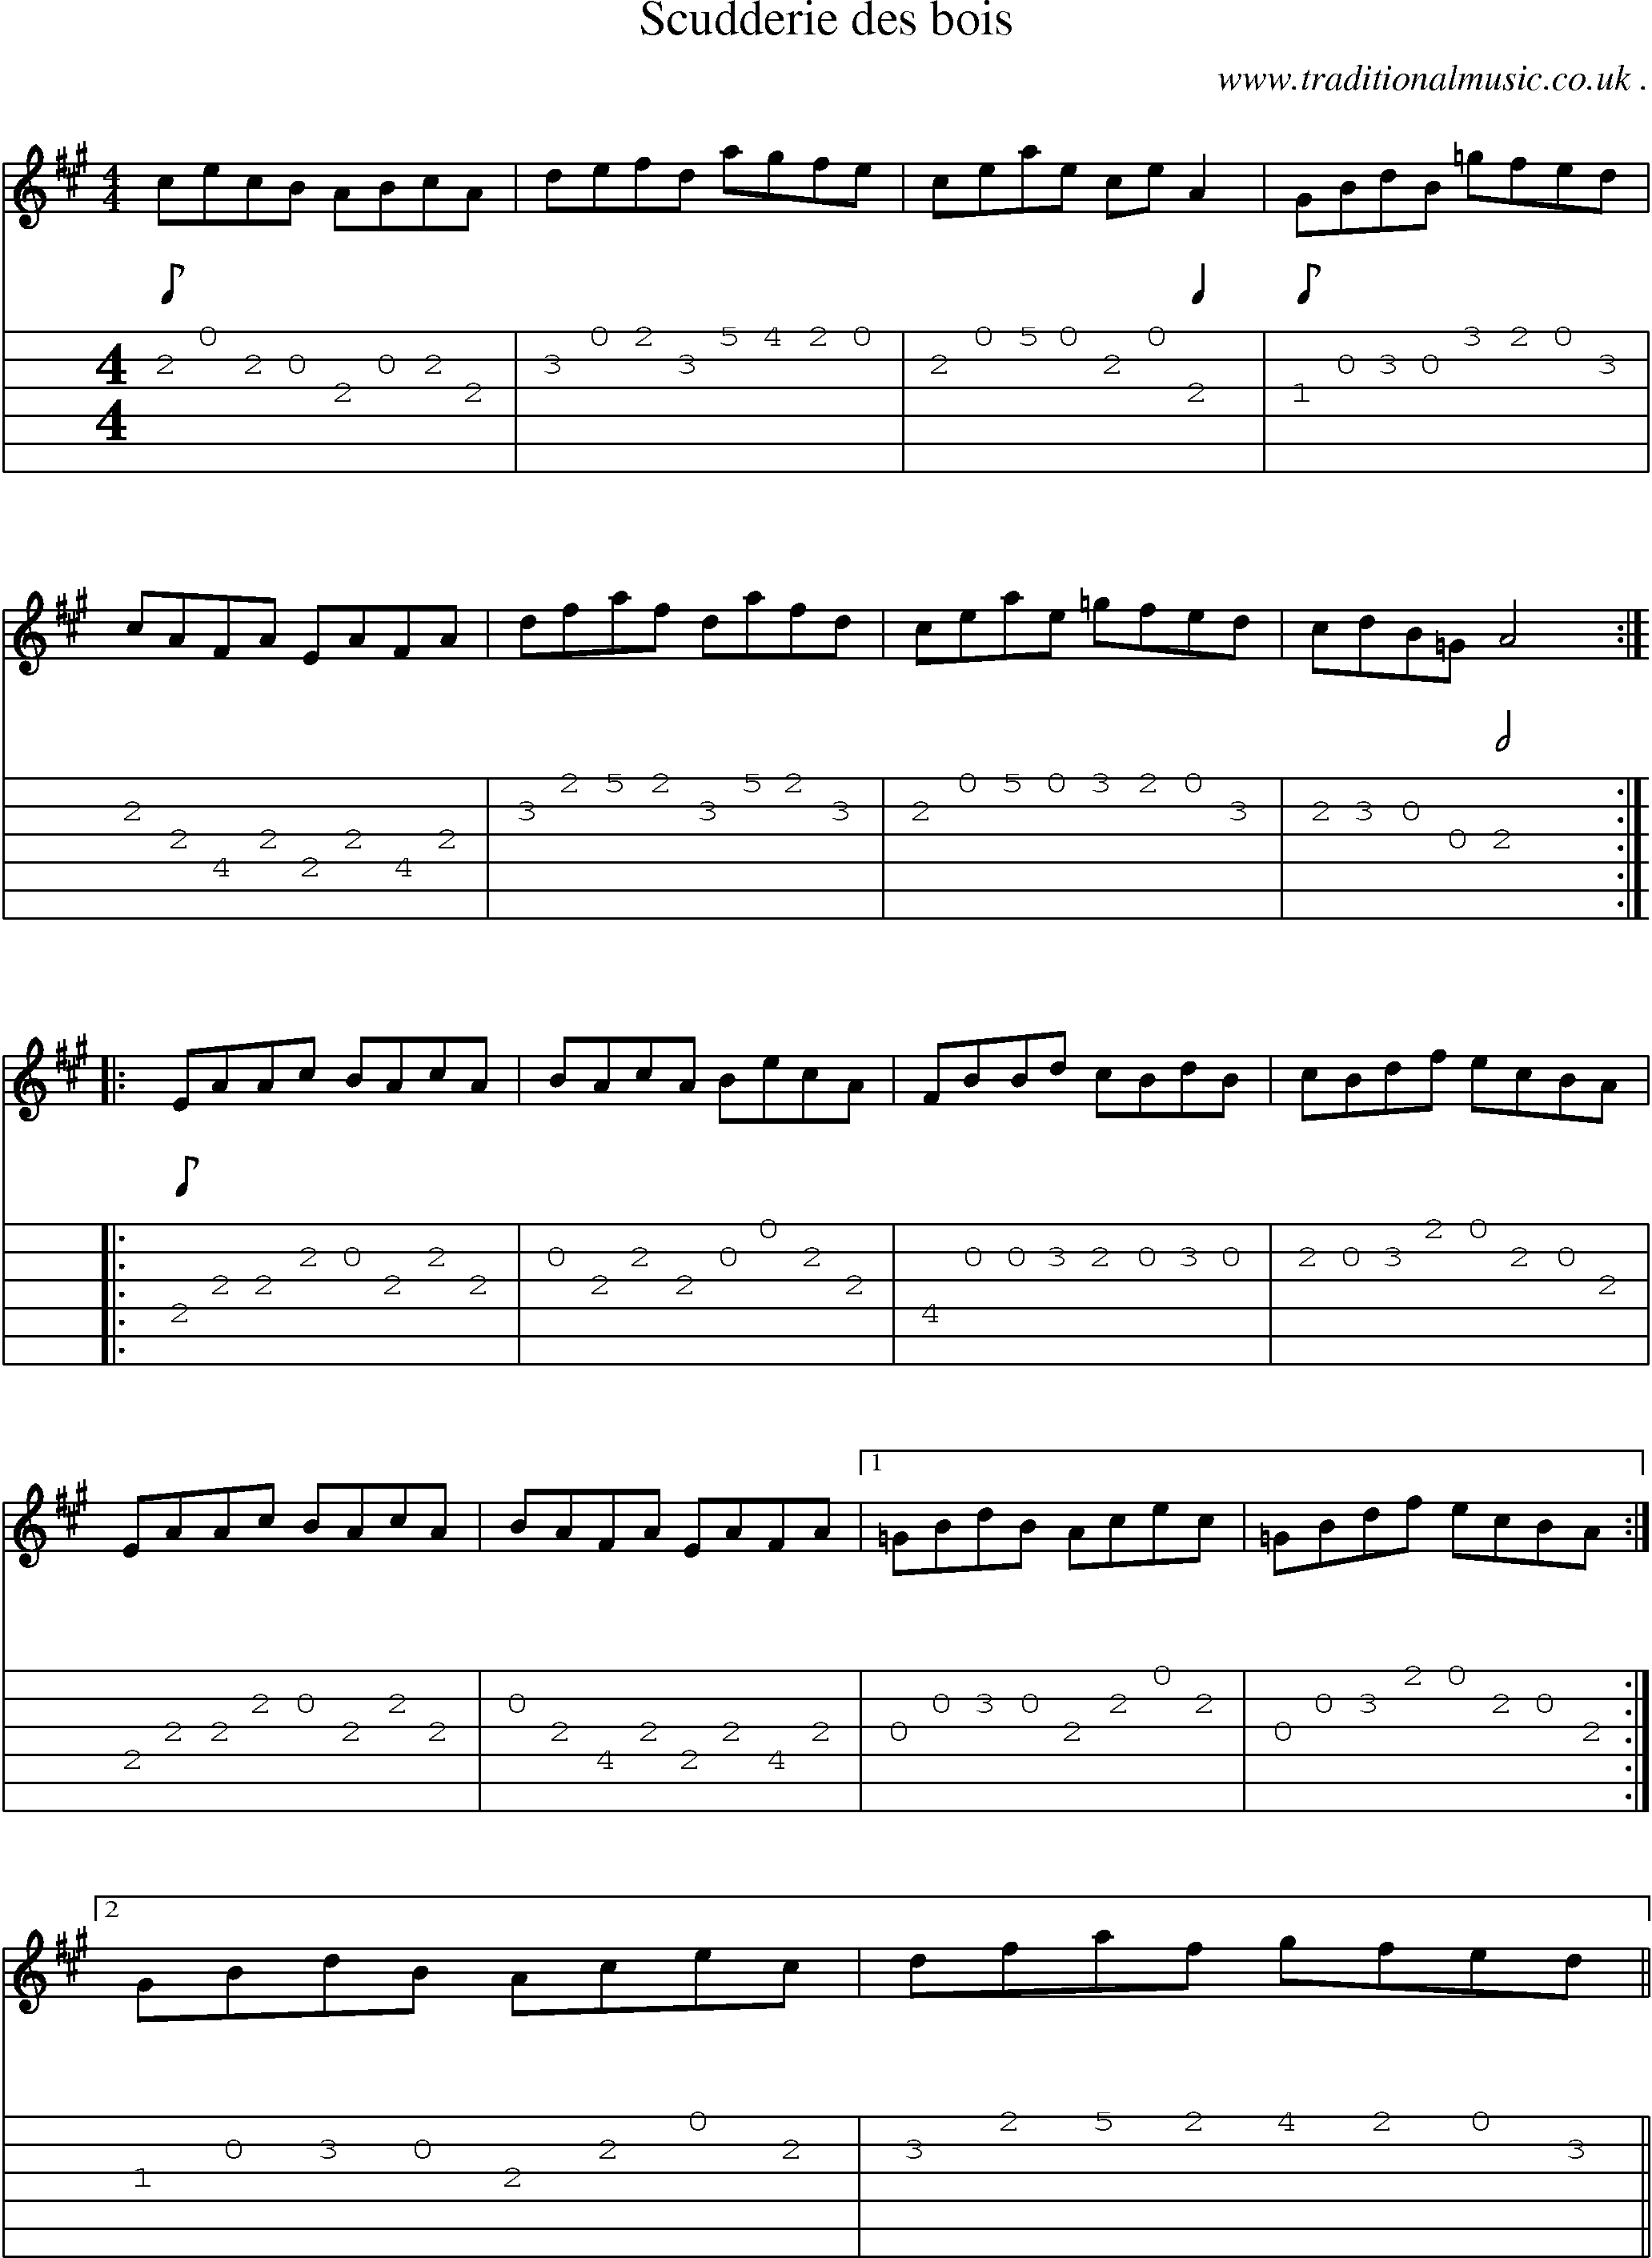 Sheet-Music and Guitar Tabs for Scudderie Des Bois